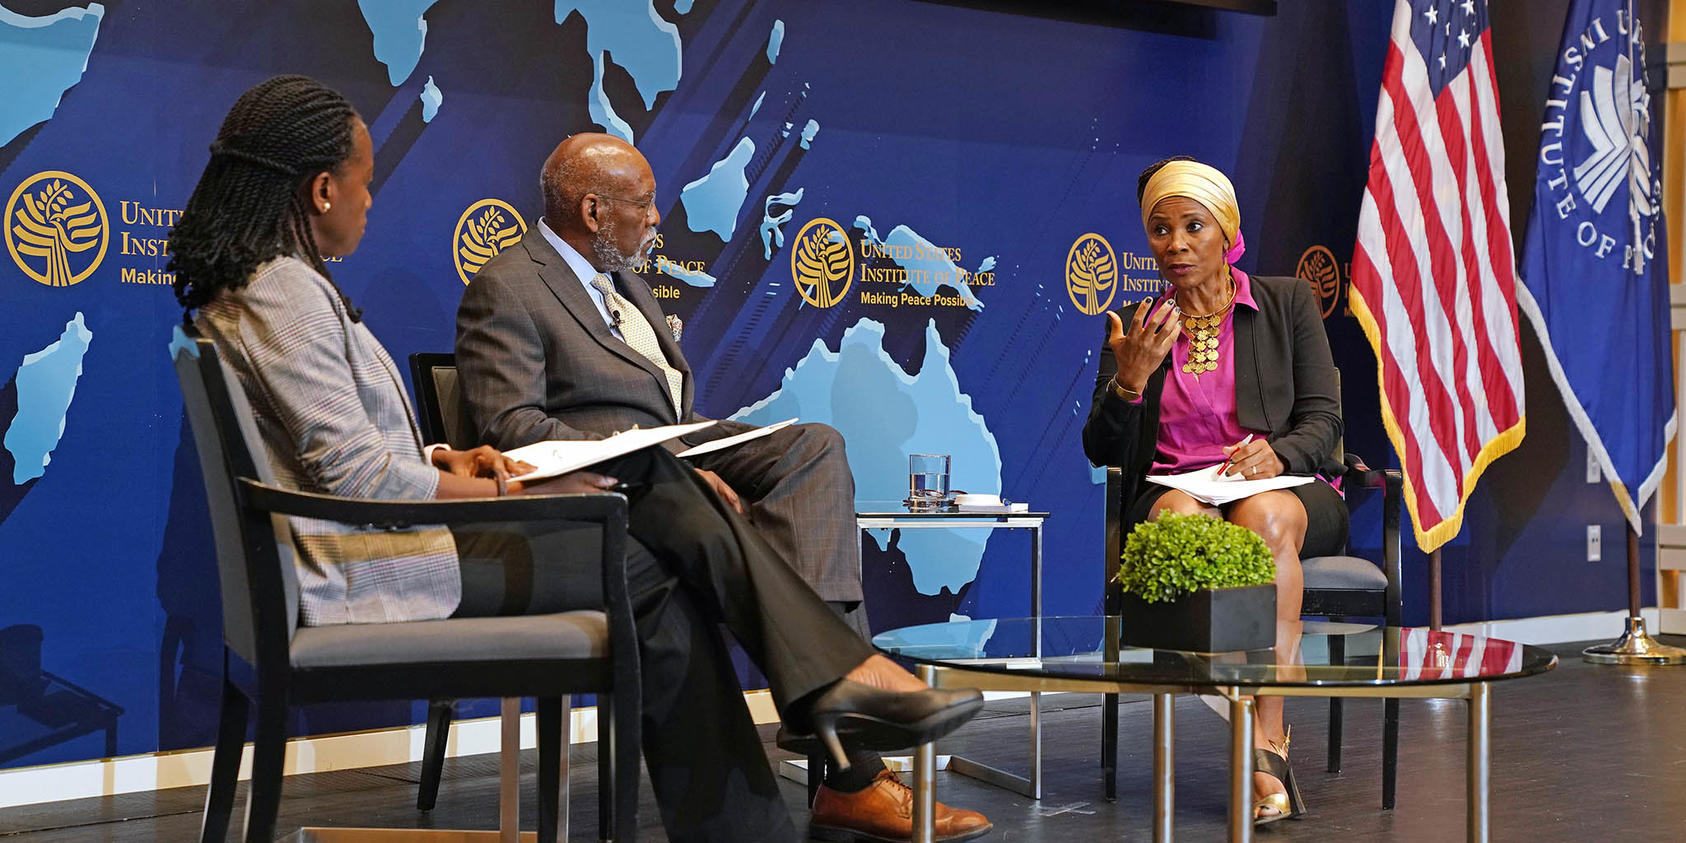 From left to right, USIP Director of West Africa programs Oge Onubogu, USIP Senior Advisor Johnny Carson and U.N. Assistant Secretary-General Ahunna Eziakonwa discuss the impact of Russia’s war in Ukraine on African economies.